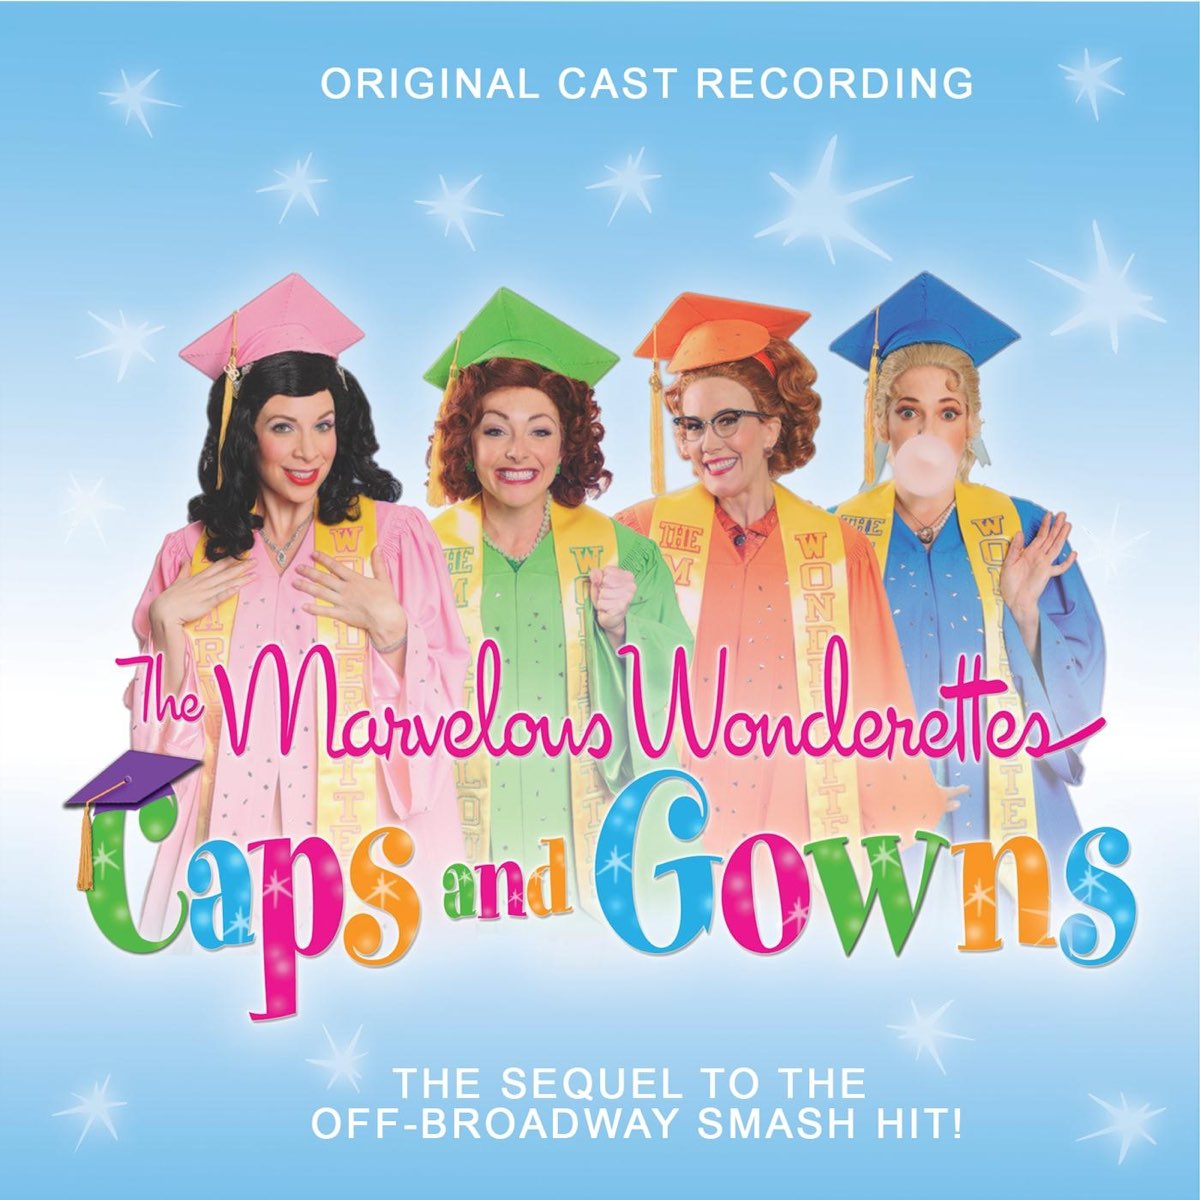 Record cast. Life could be Dream the Marvelous Wonderettes.